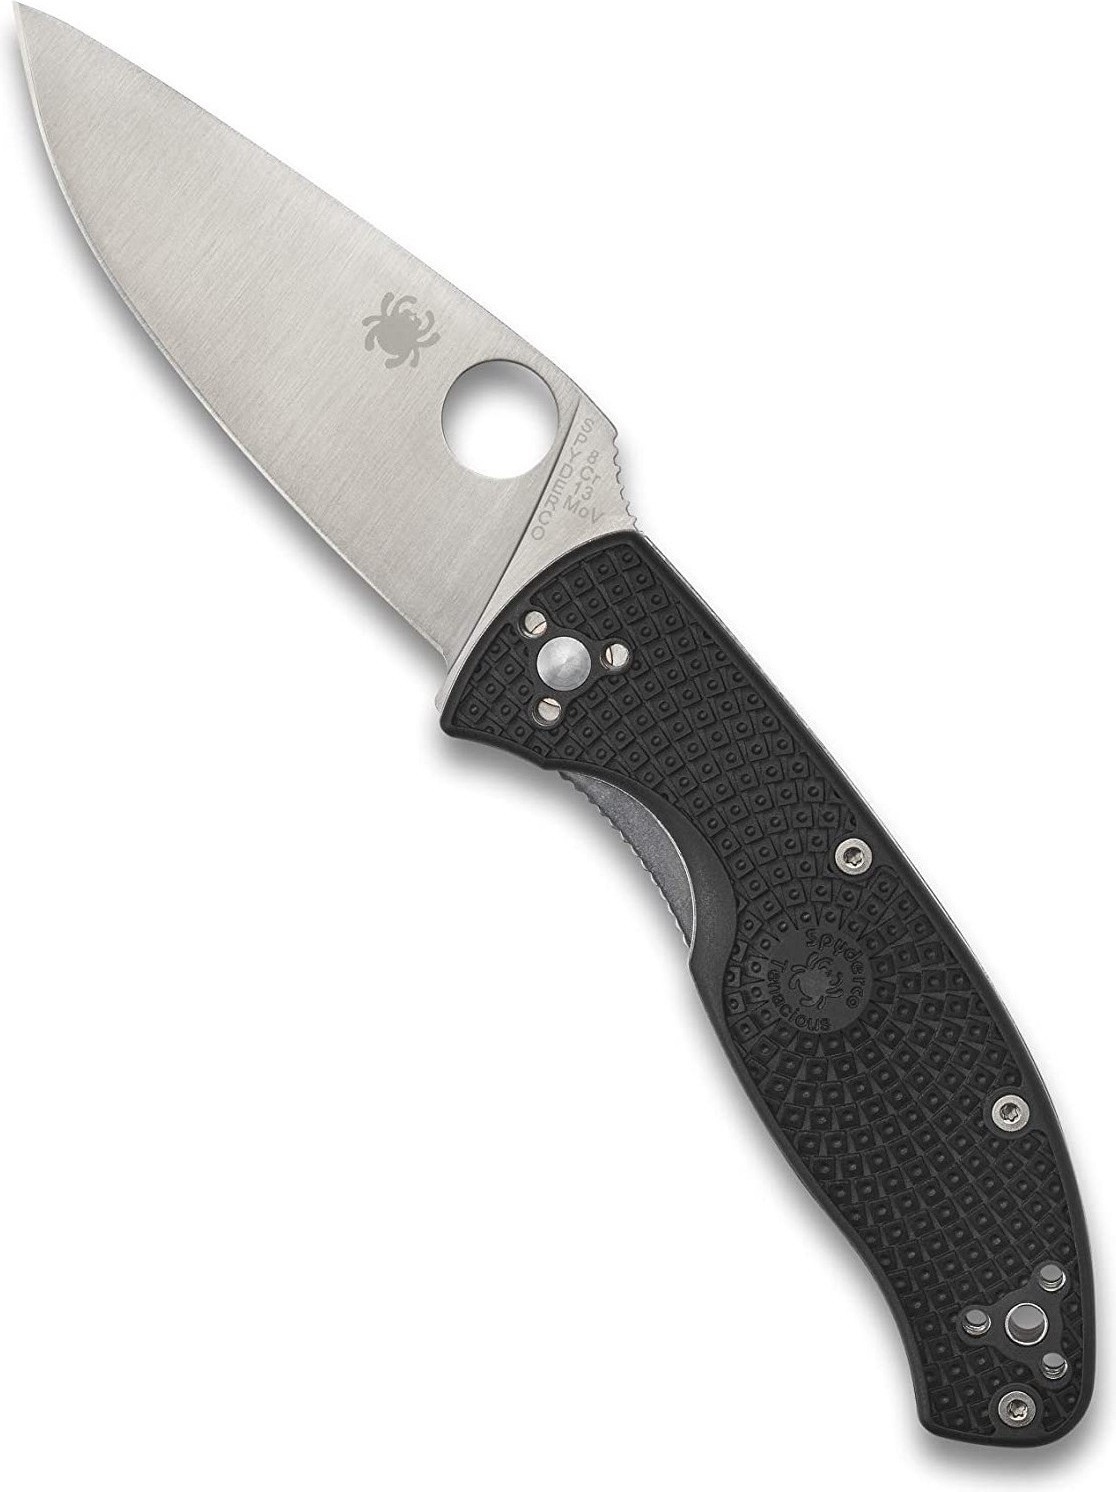 Spyderco Sage 5. Spyderco Resilience c142gp. Spyderco Tenacious. Spyderco Resilience Lightweight. Spyderco resilience